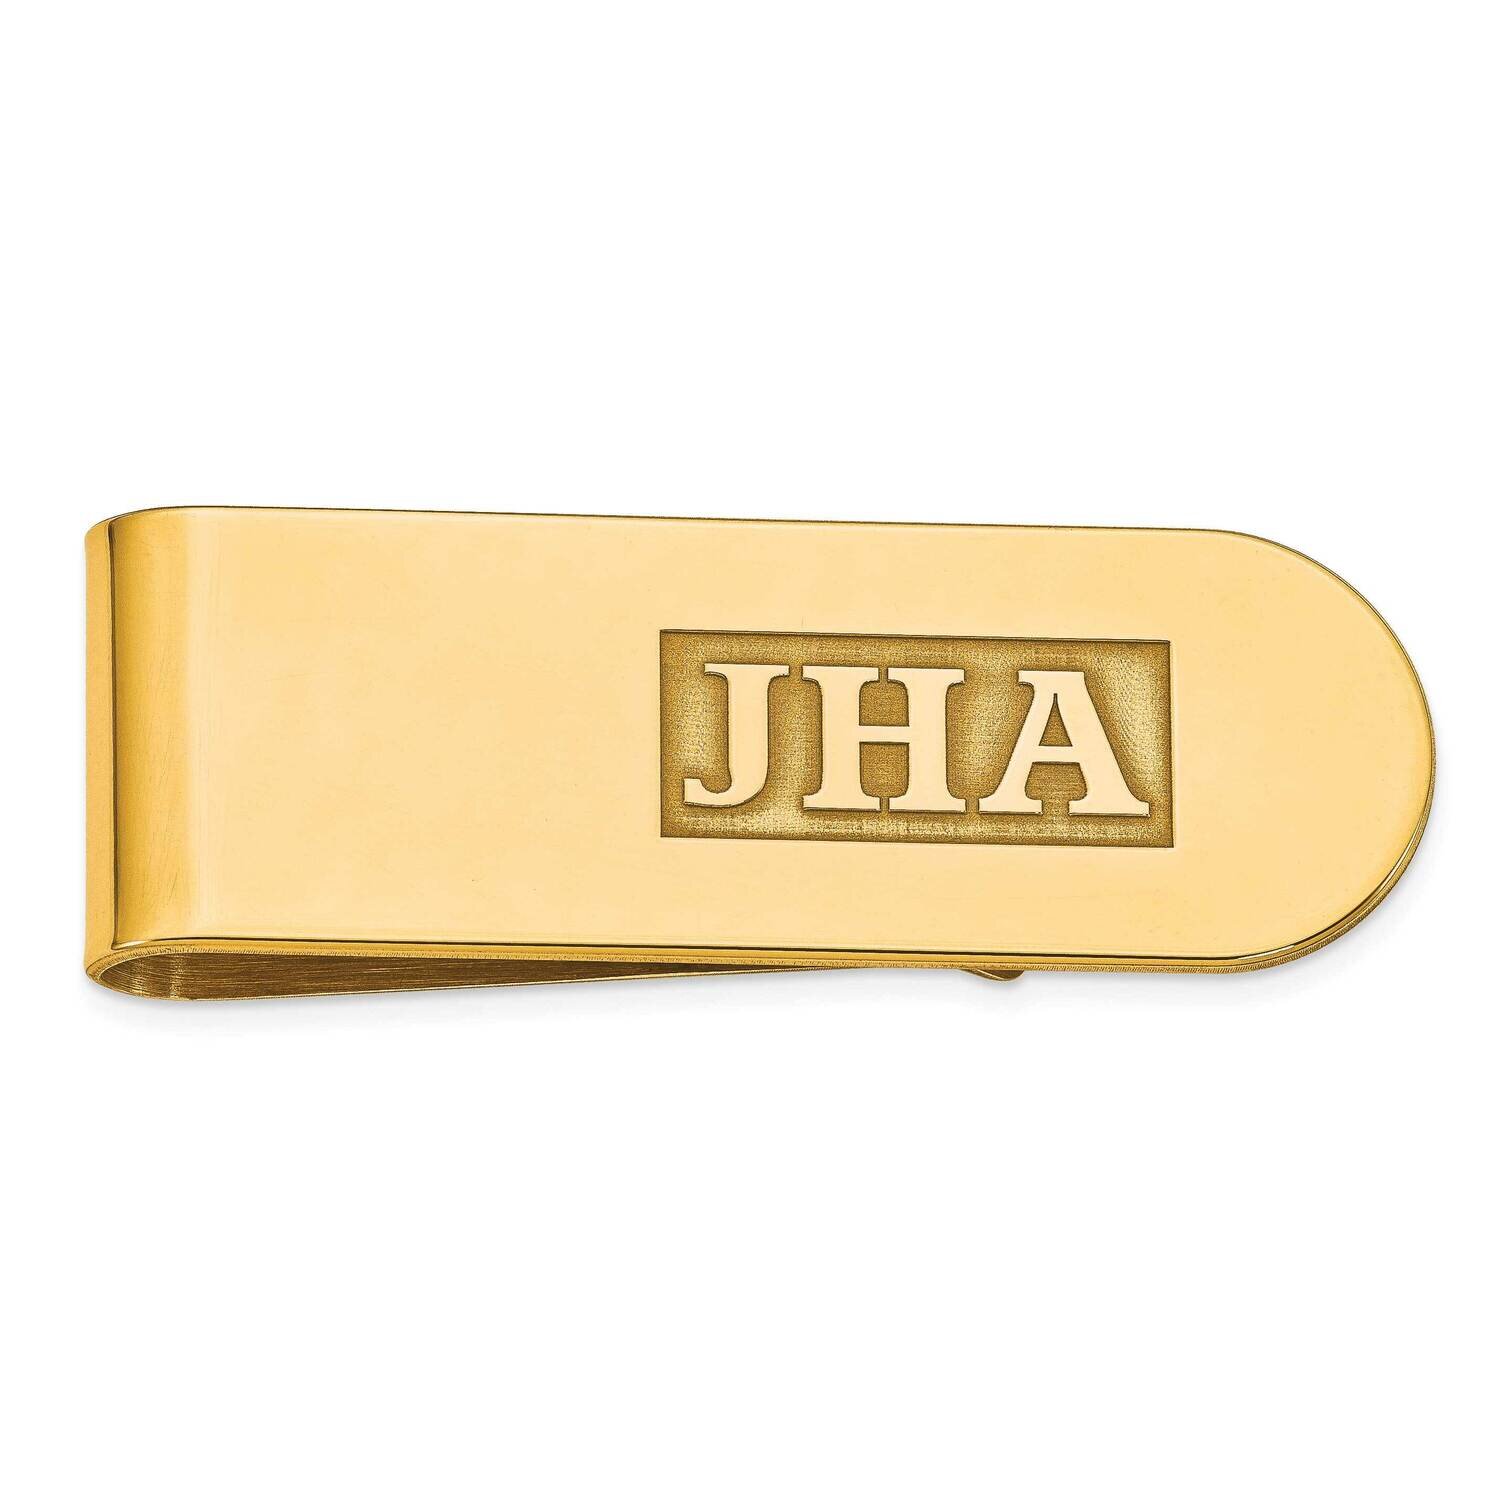 Raised Letters Polished Monogram Money Clip Gold-plated Silver XNA608GP